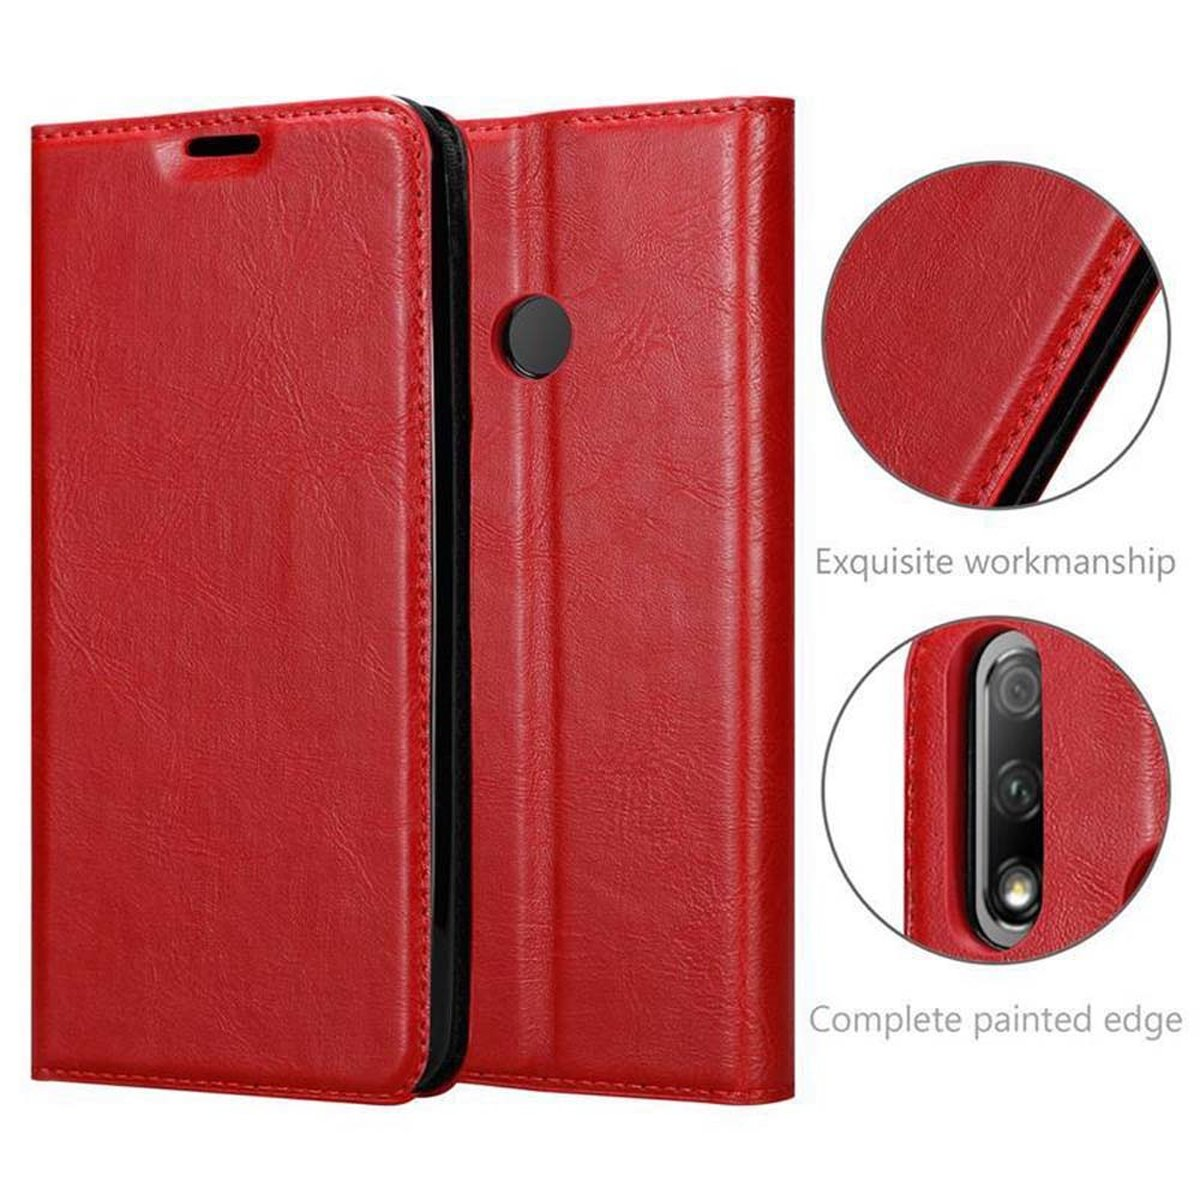 CADORABO Bookcover, ROT Honor, APFEL Magnet, 9X, Invisible Book Hülle